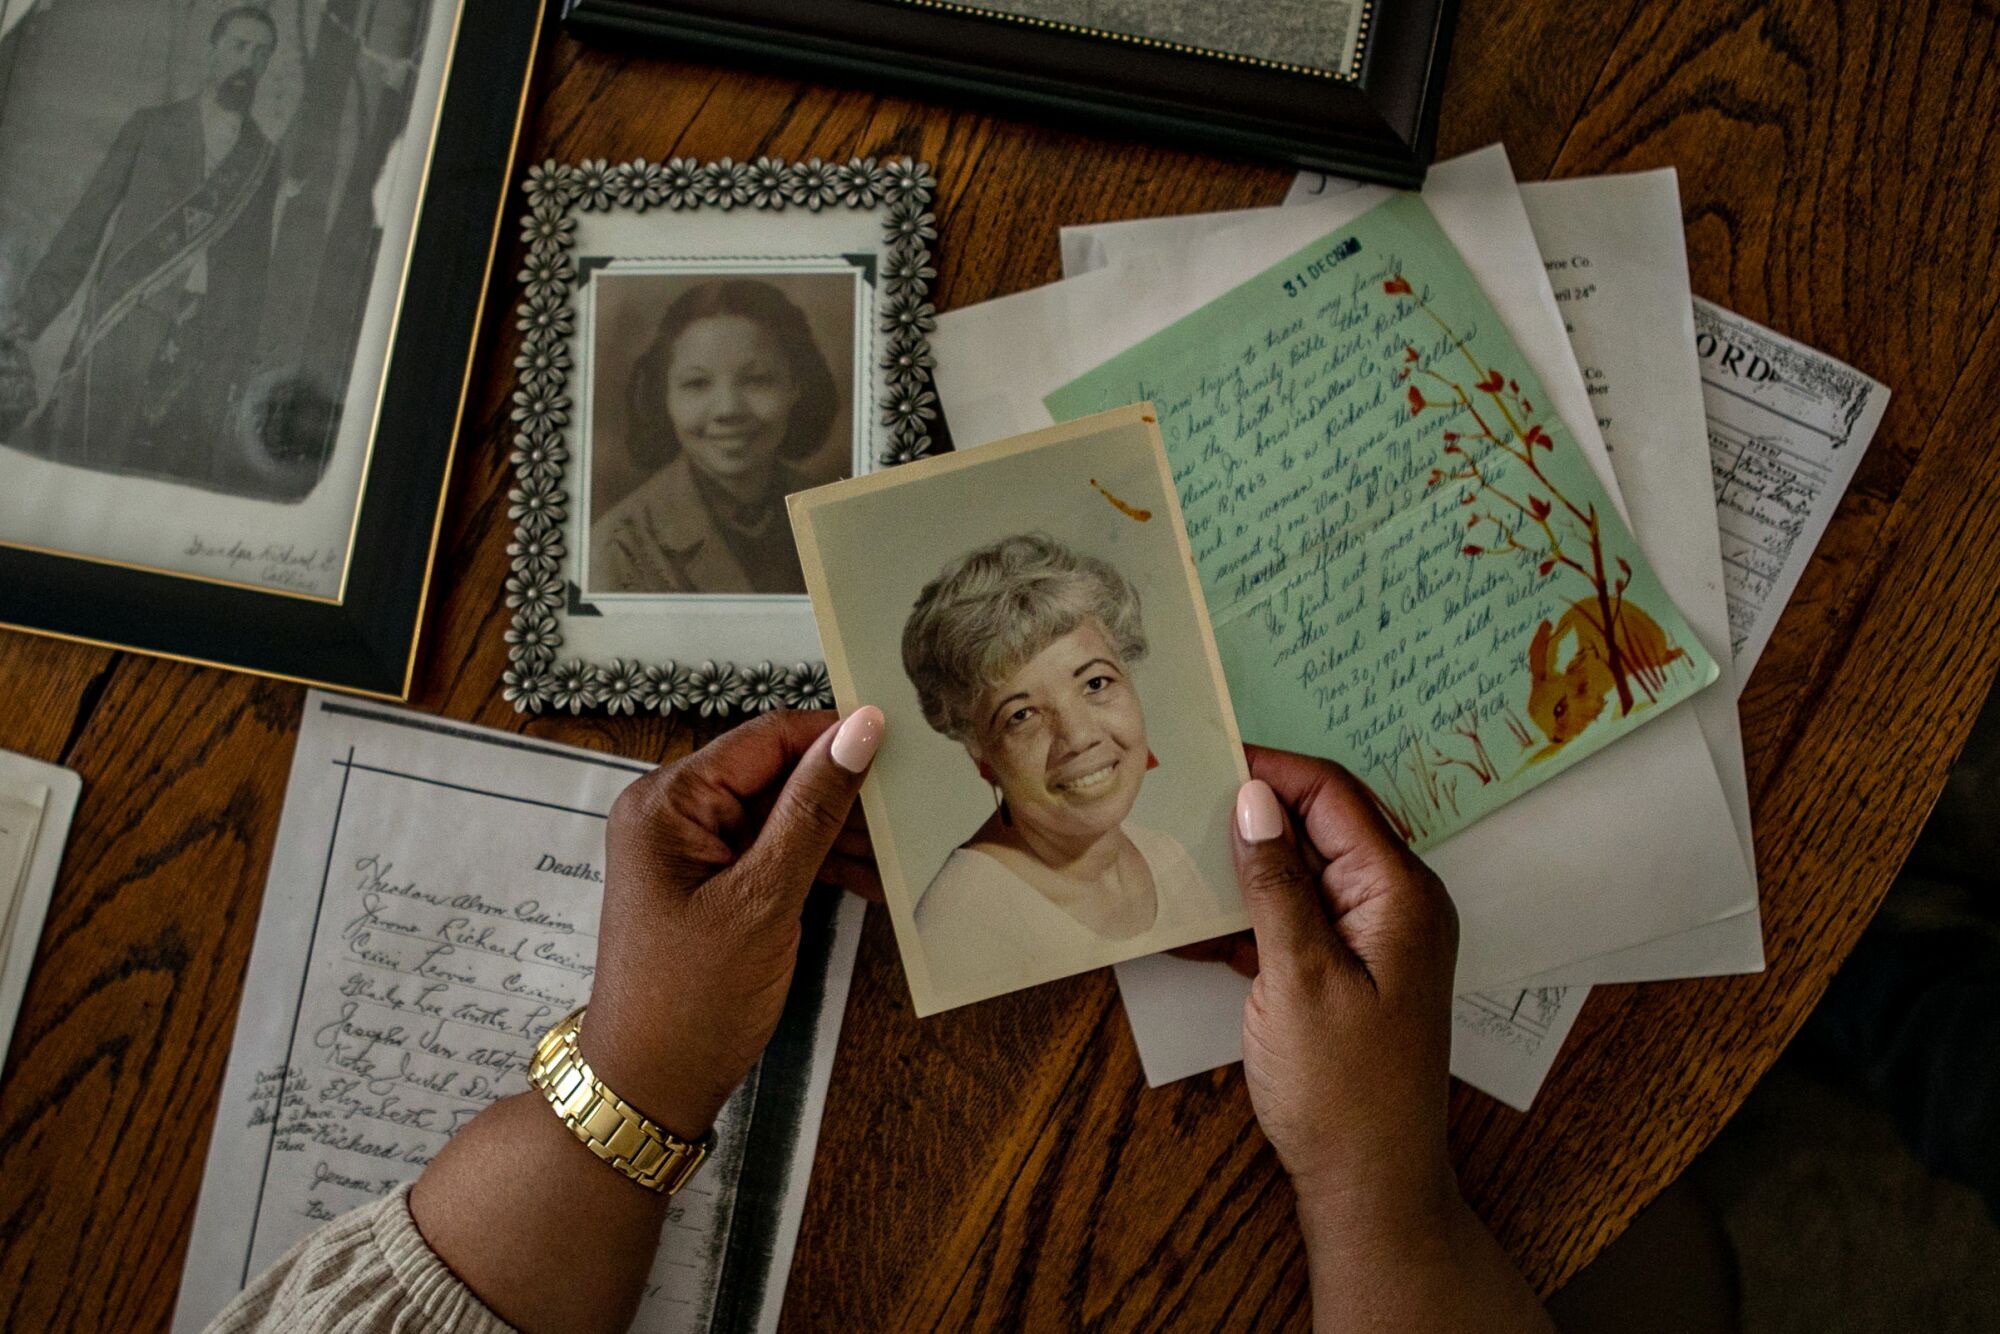 A person holds a photo of a woman at a table full of old family documents and pictures.